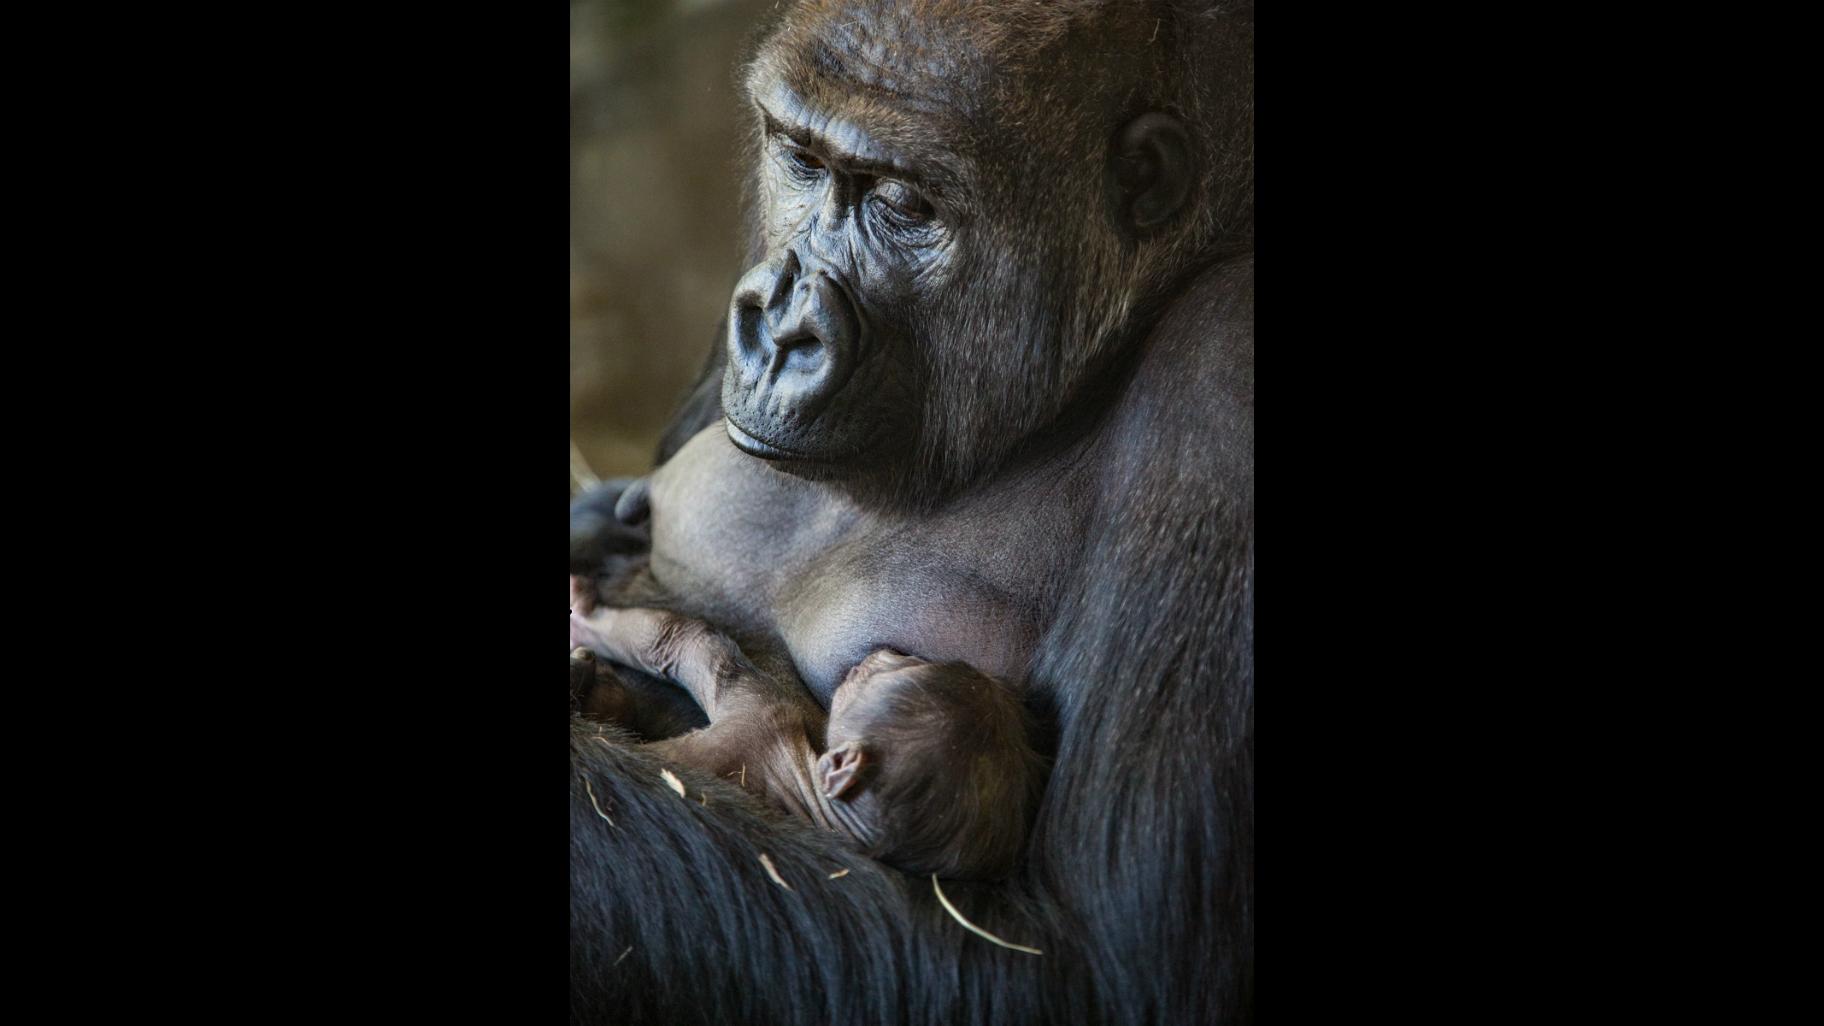 A male infant western lowland gorilla was born May 12 at Lincoln Park Zoo. (Christopher Bijalba / Lincoln Park Zoo)